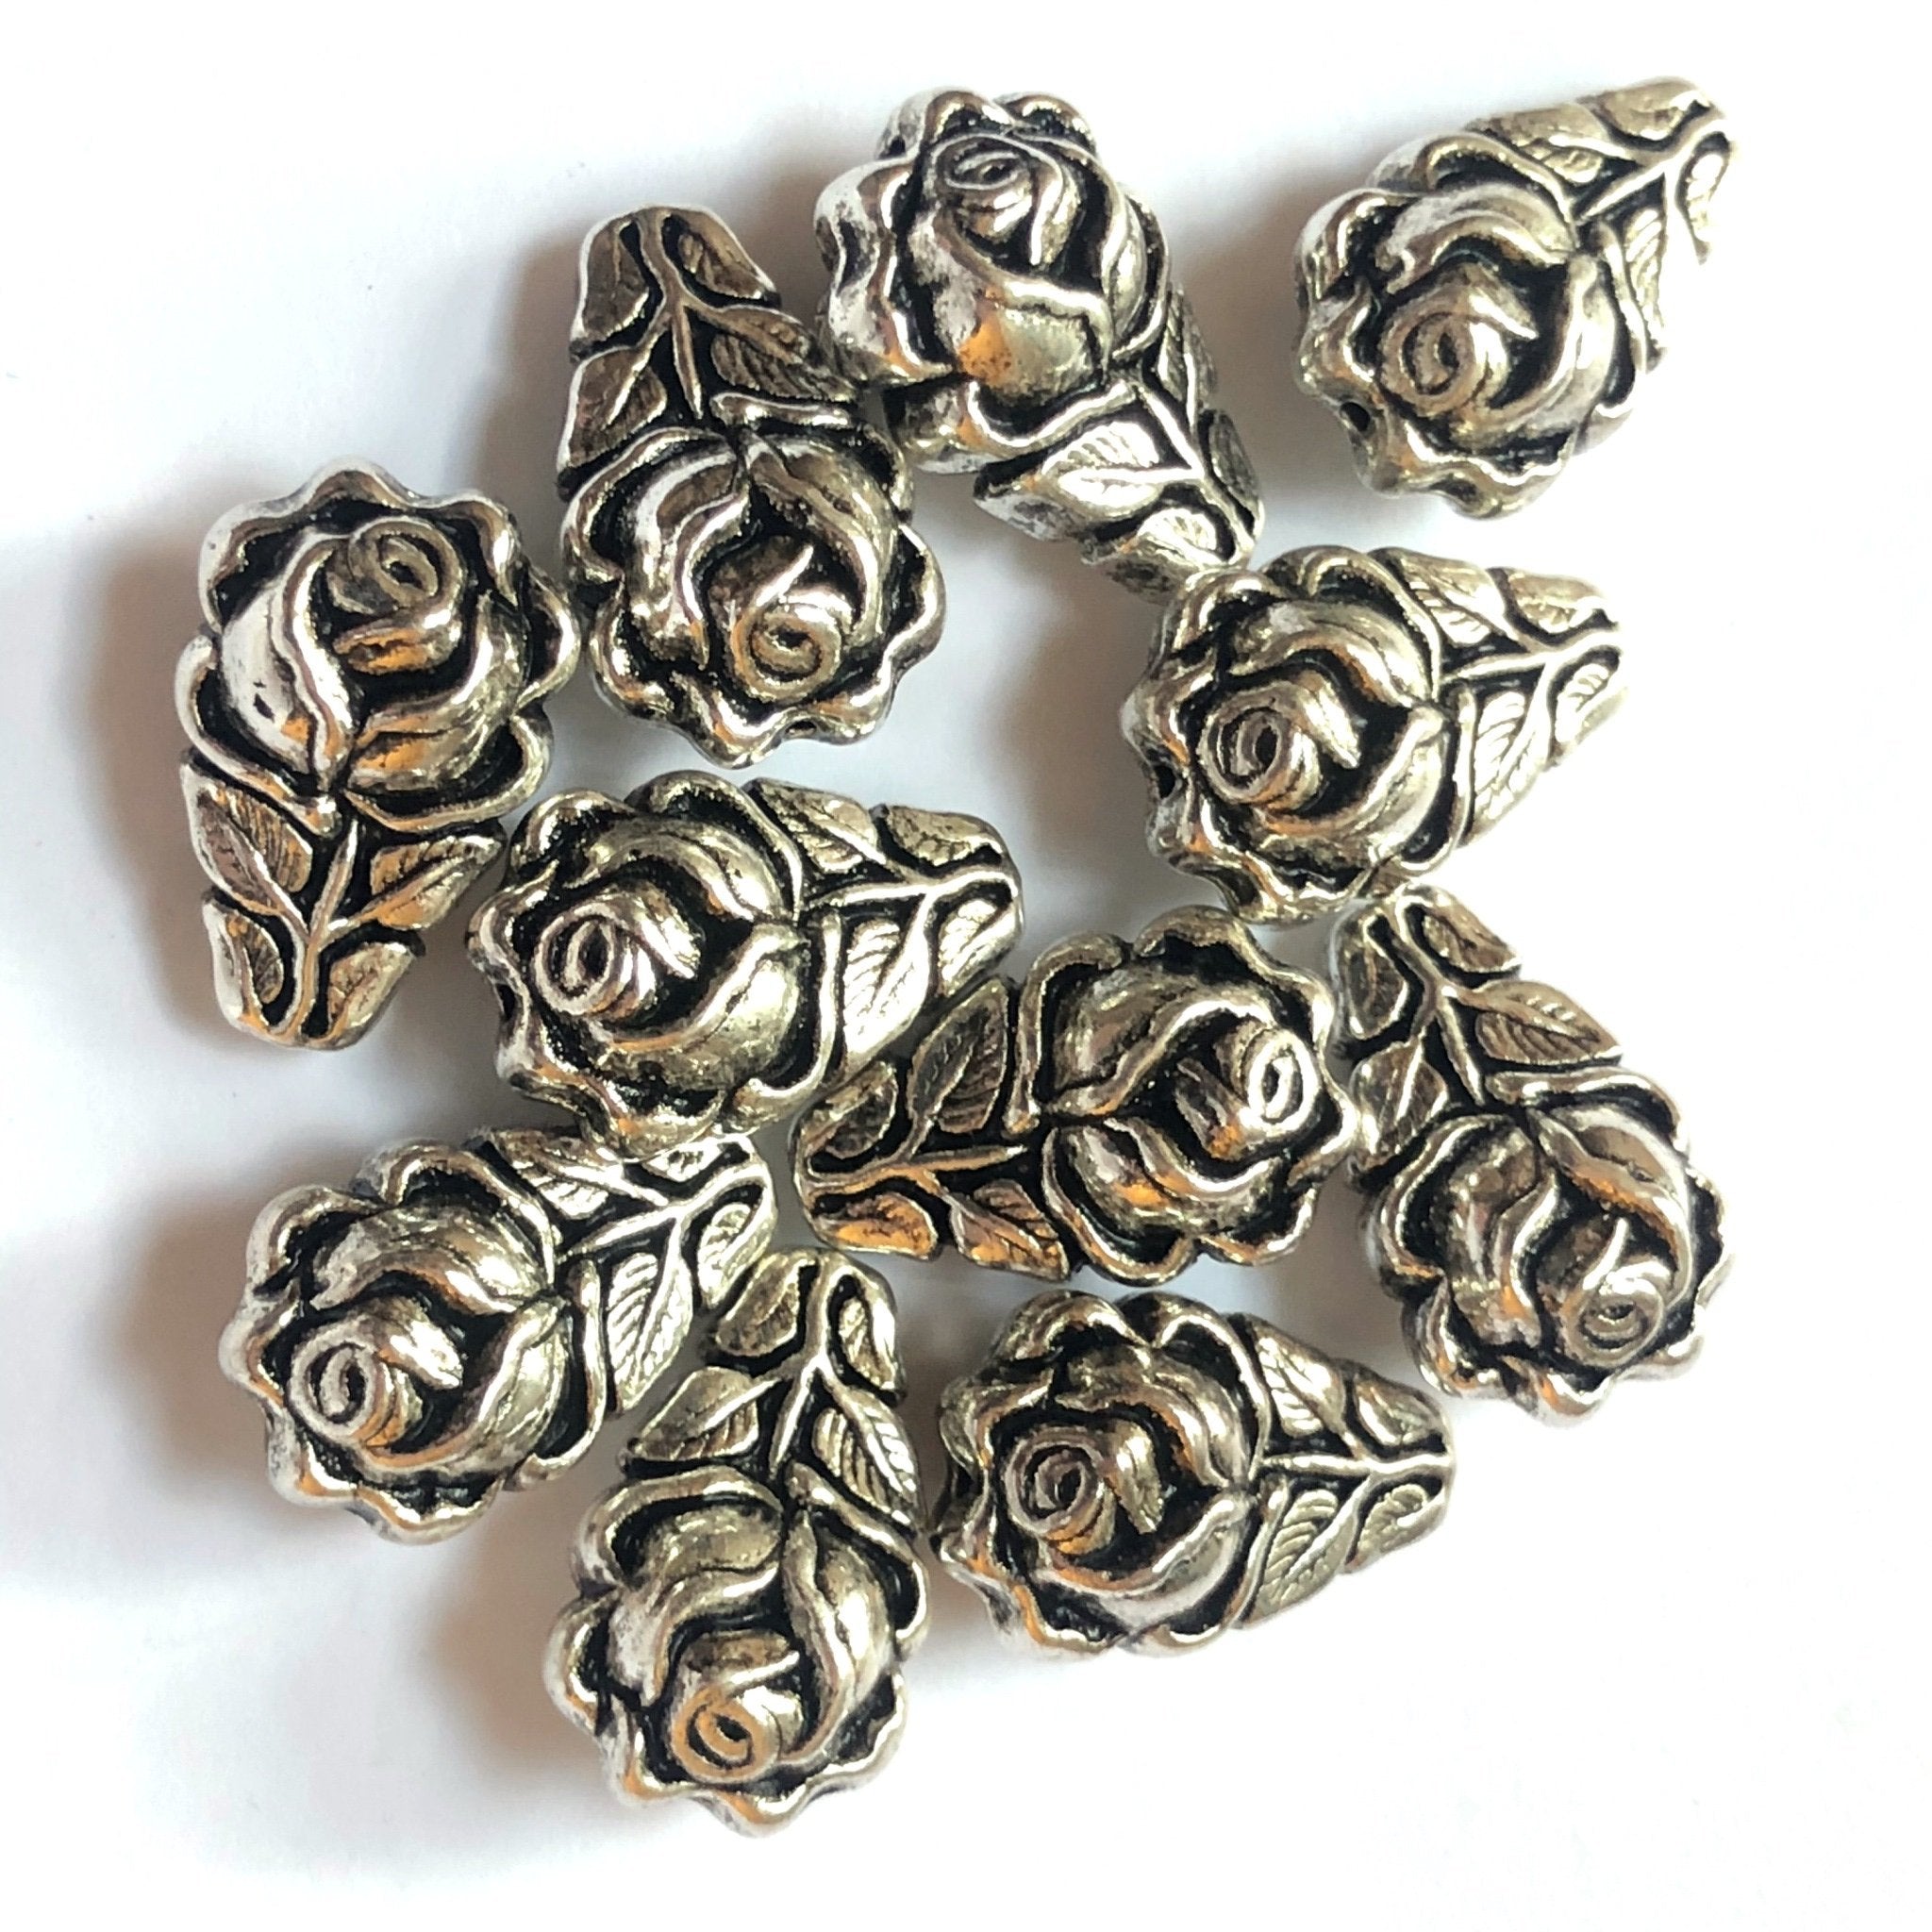 14X9MM Antique Silver Rose Pear Bead (72 pieces)